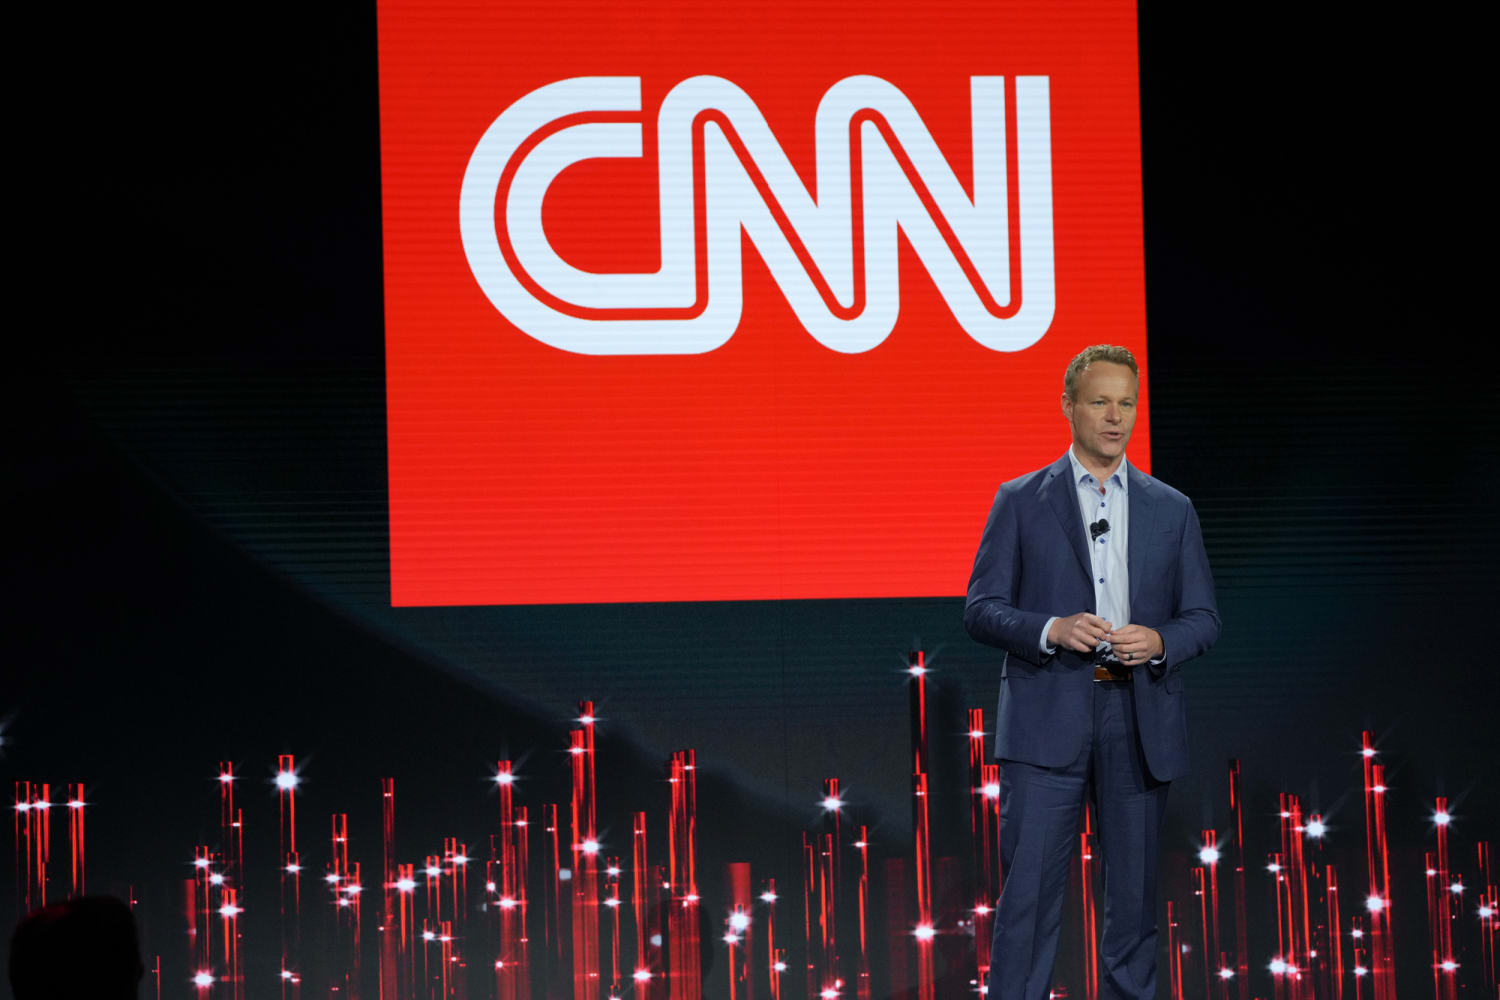 CNN CEO Chris Licht apologizes to staff during internal Monday morning call